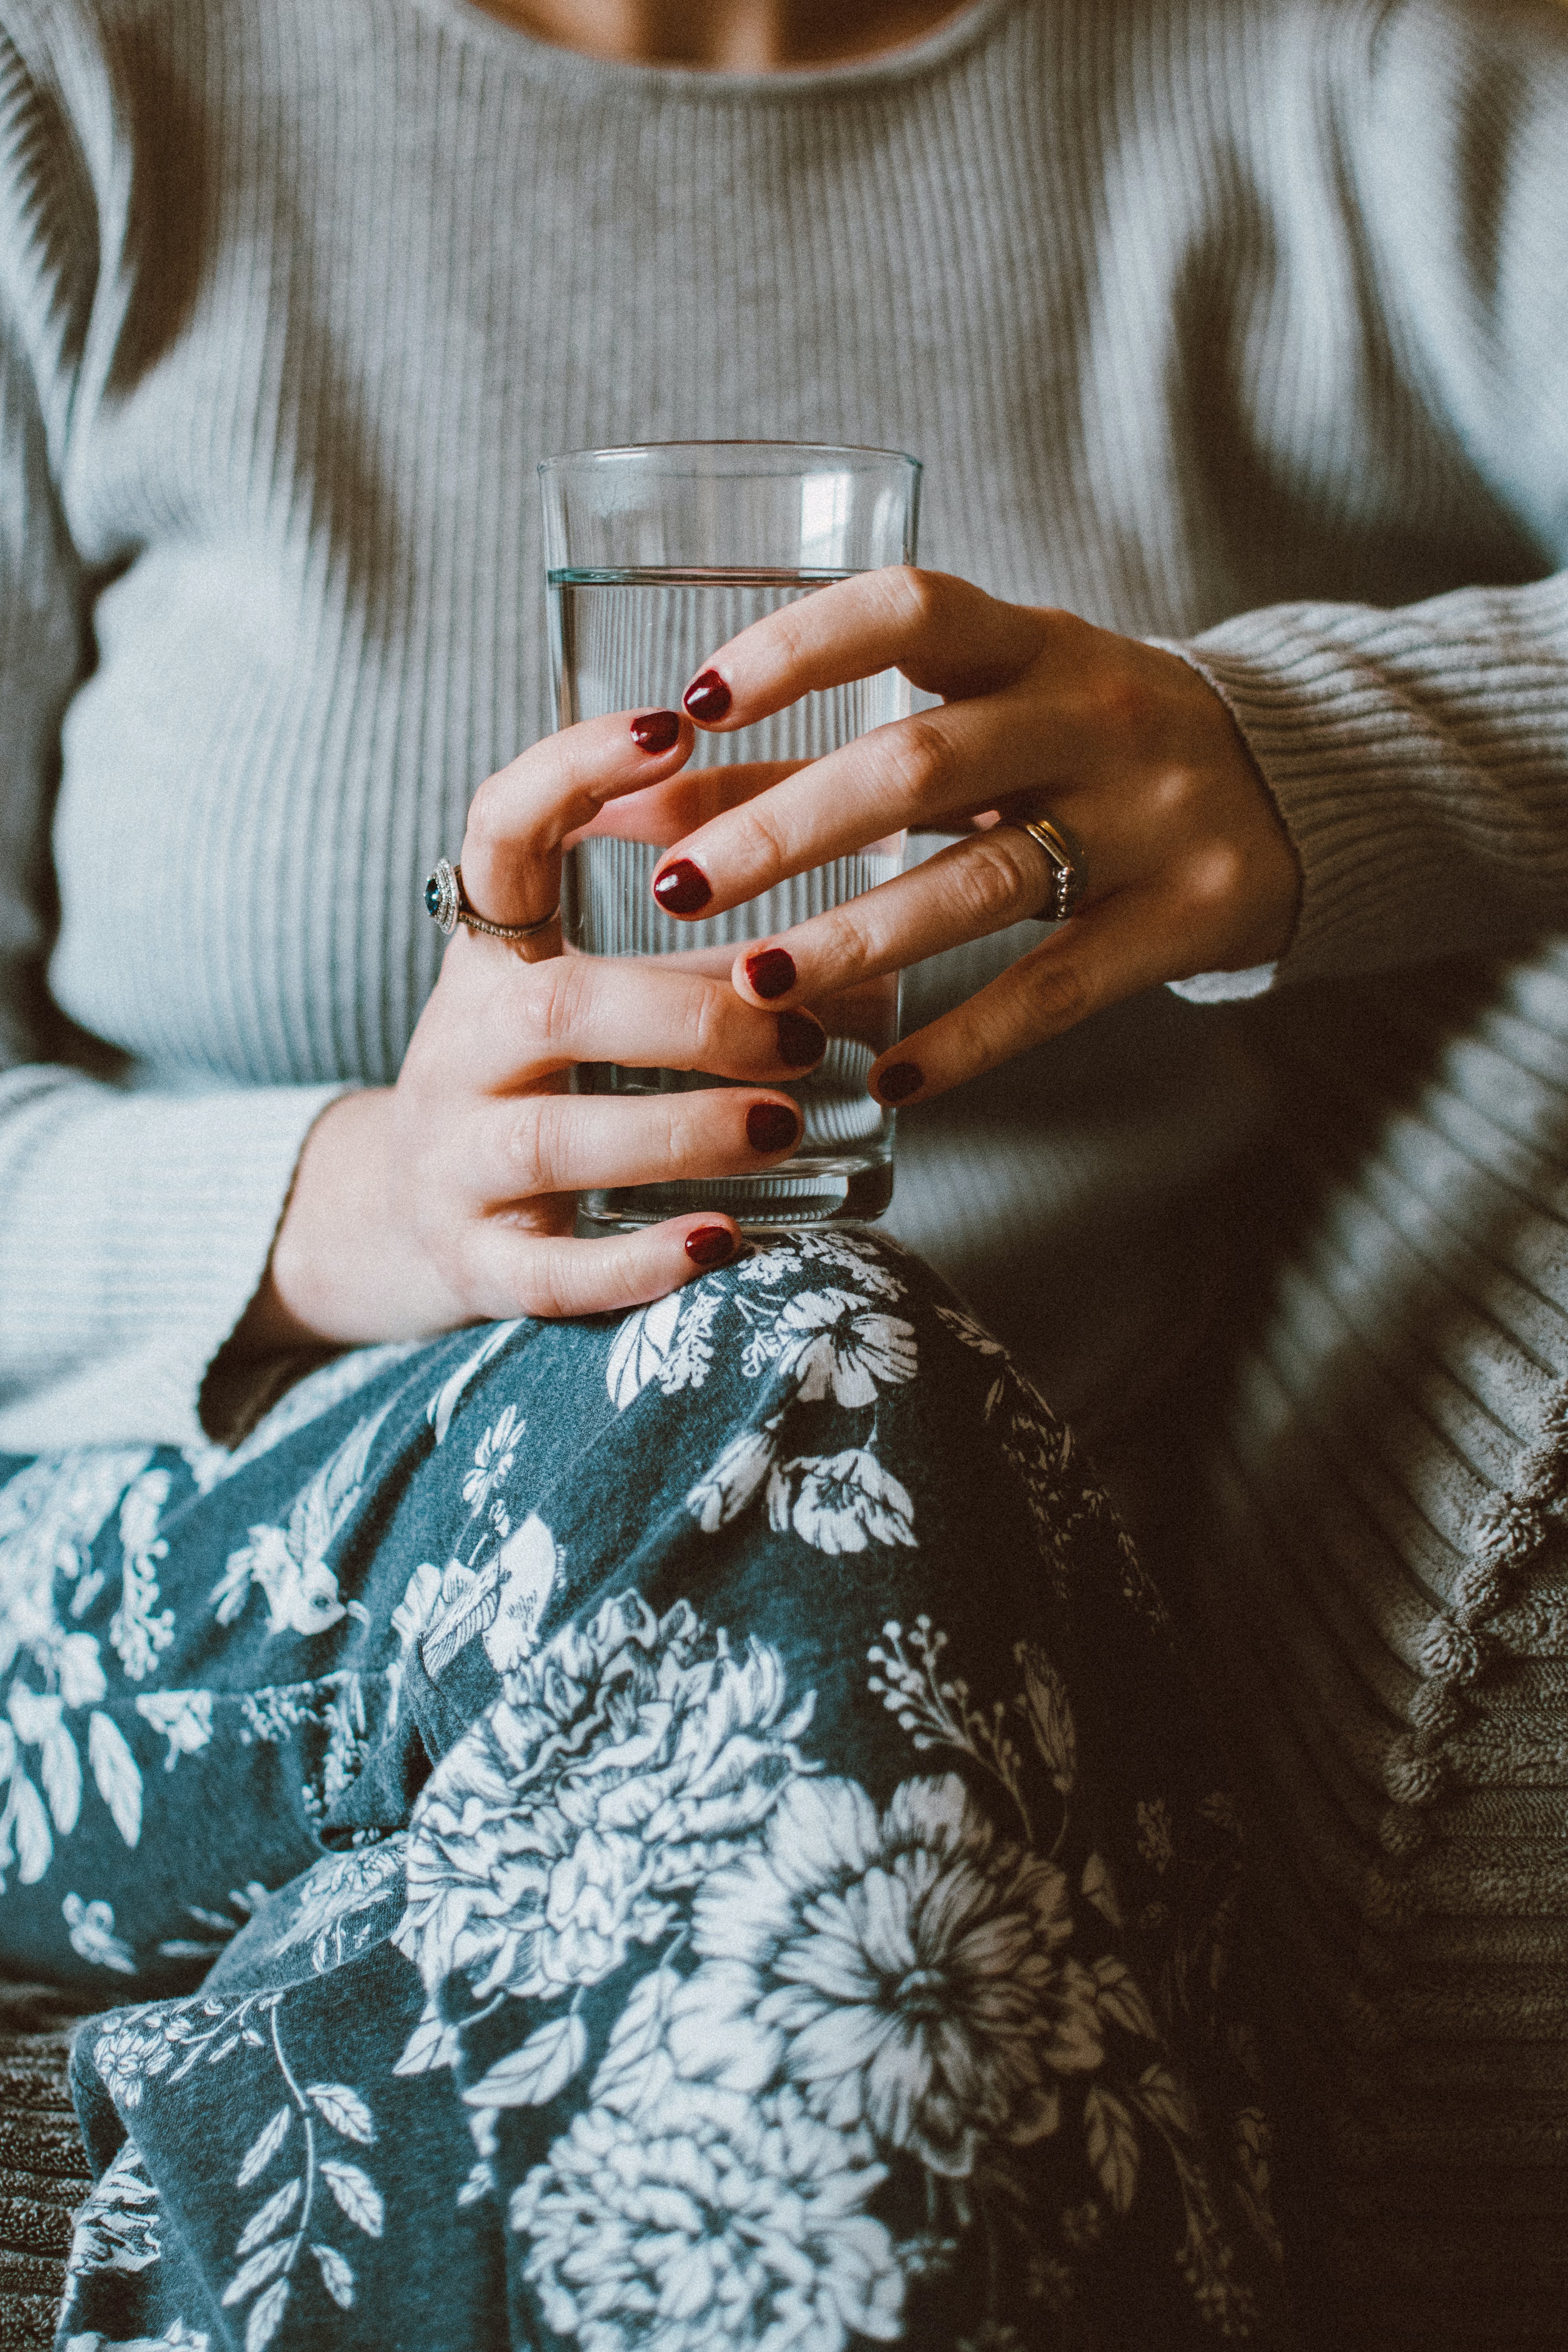 A person holding a glass of water. | Source: Pexels